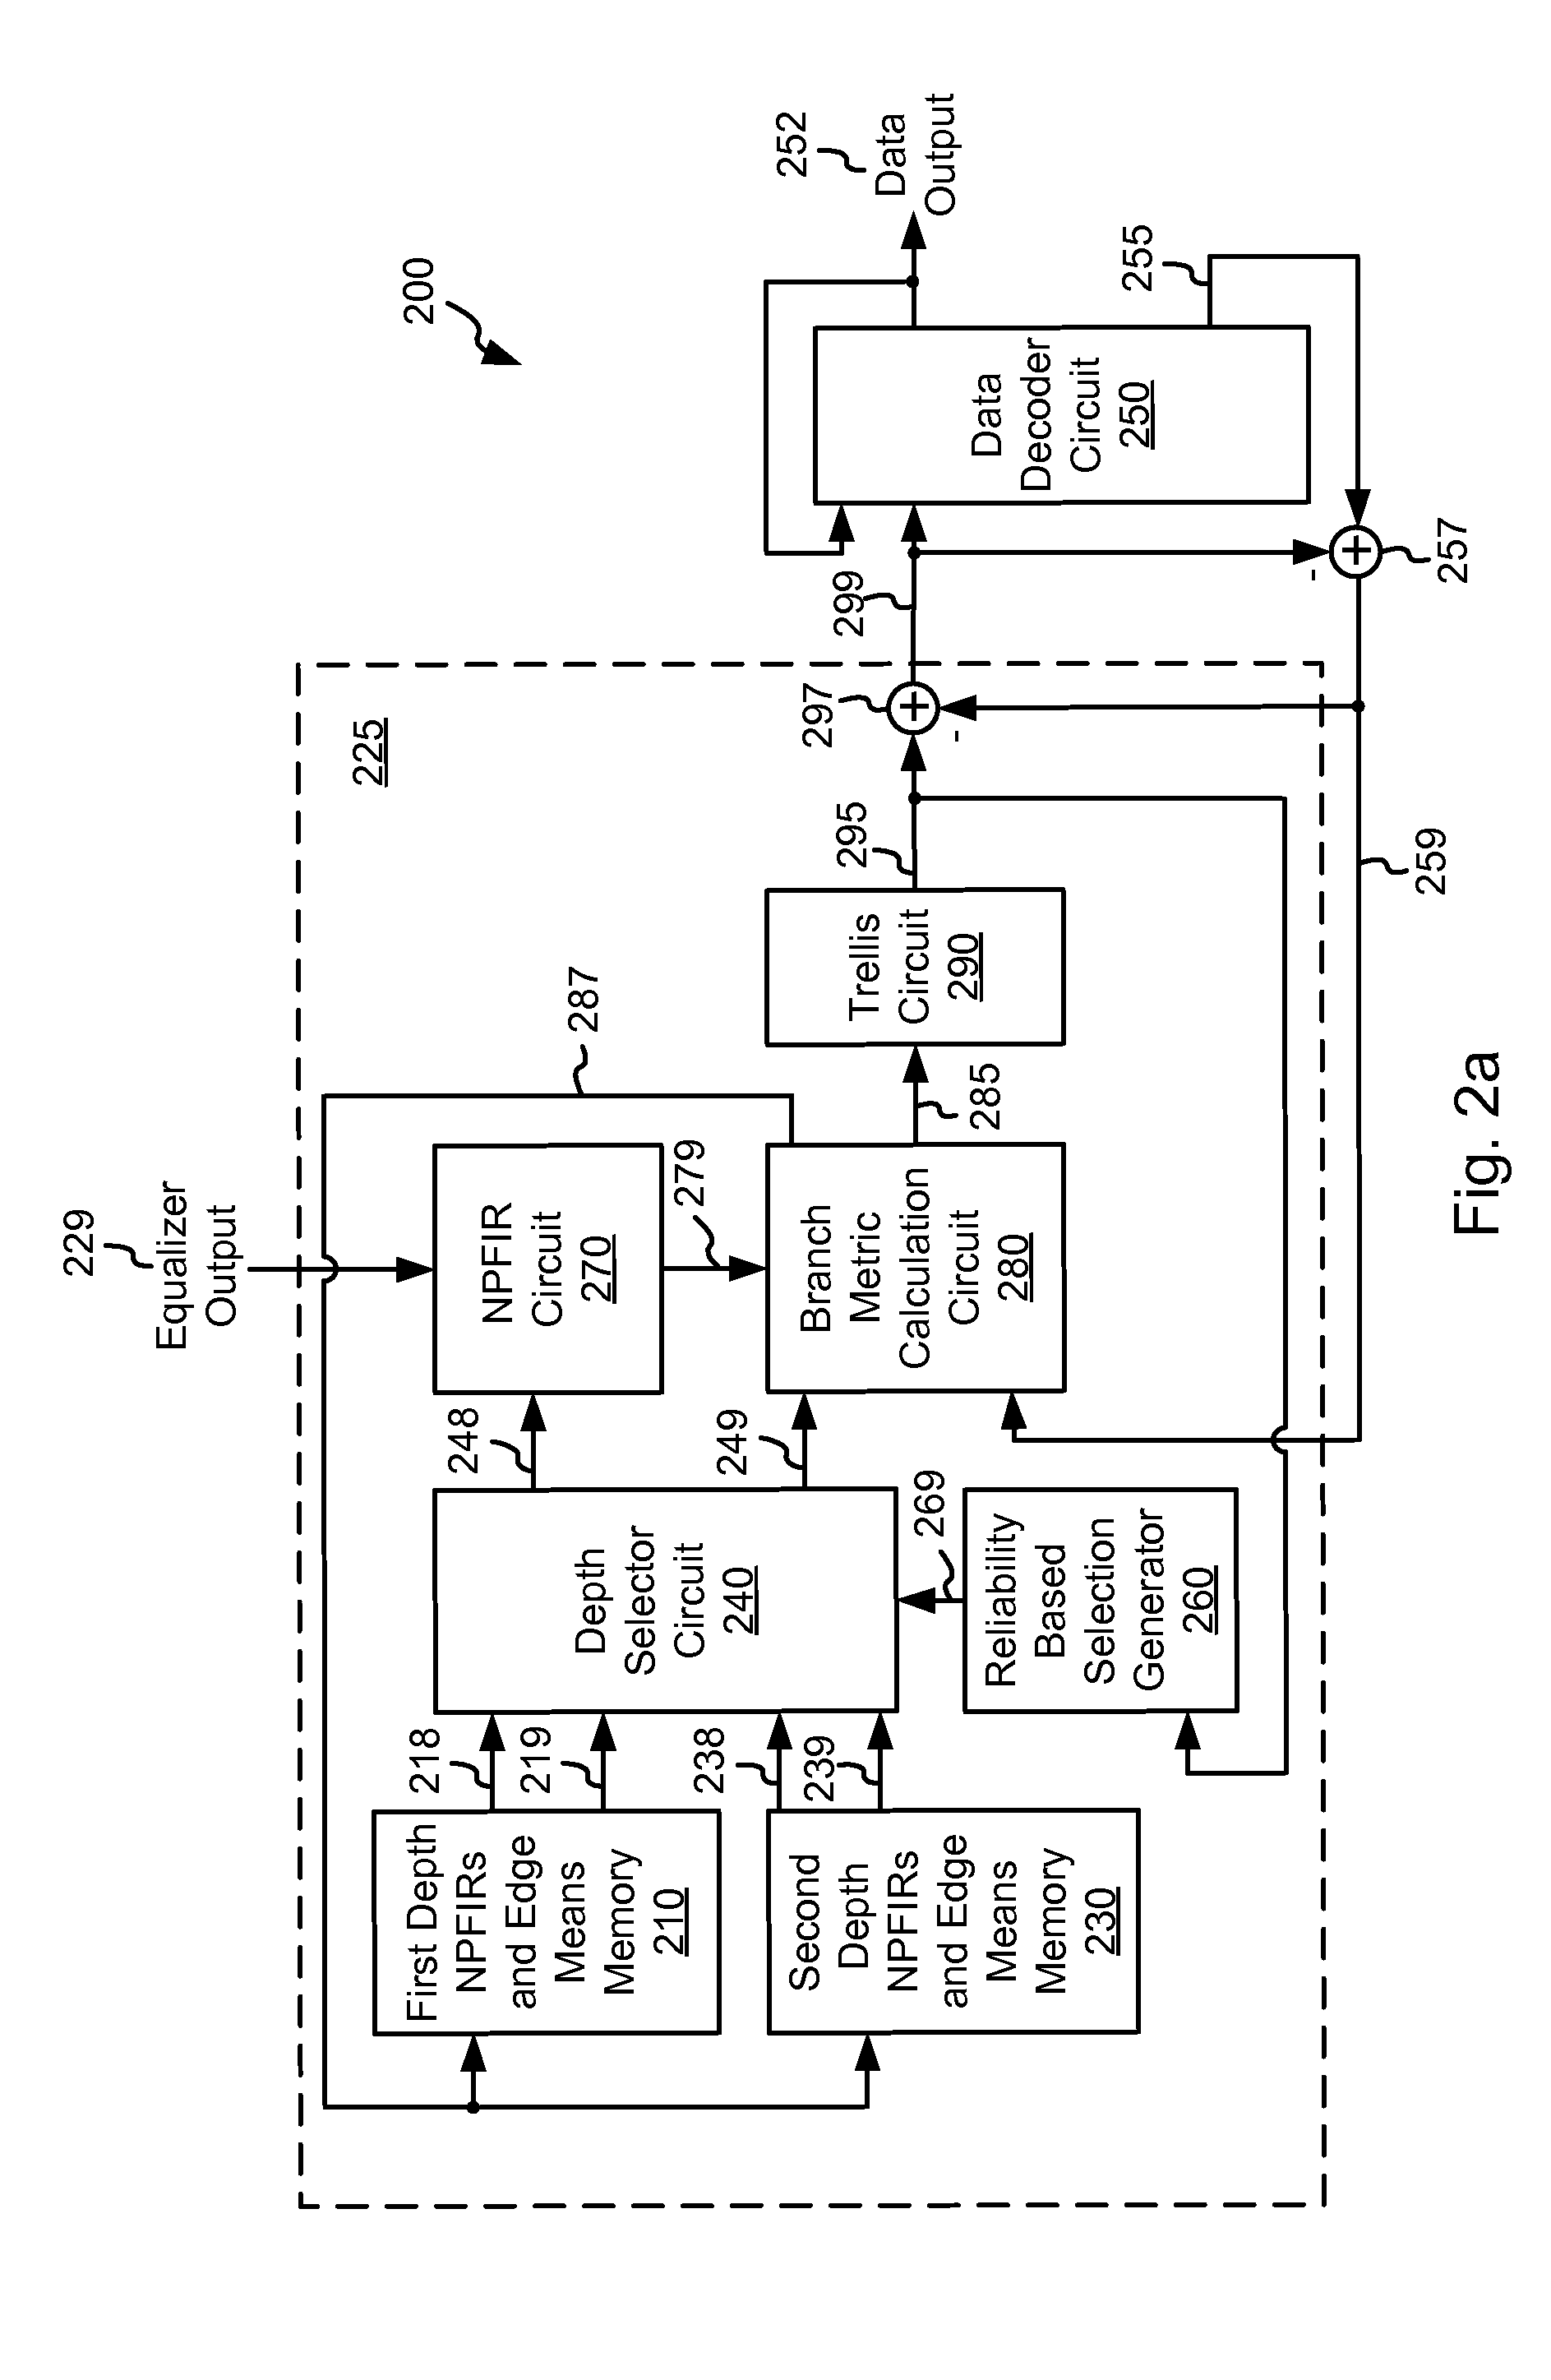 Systems and Methods for Improved Data Detection Processing